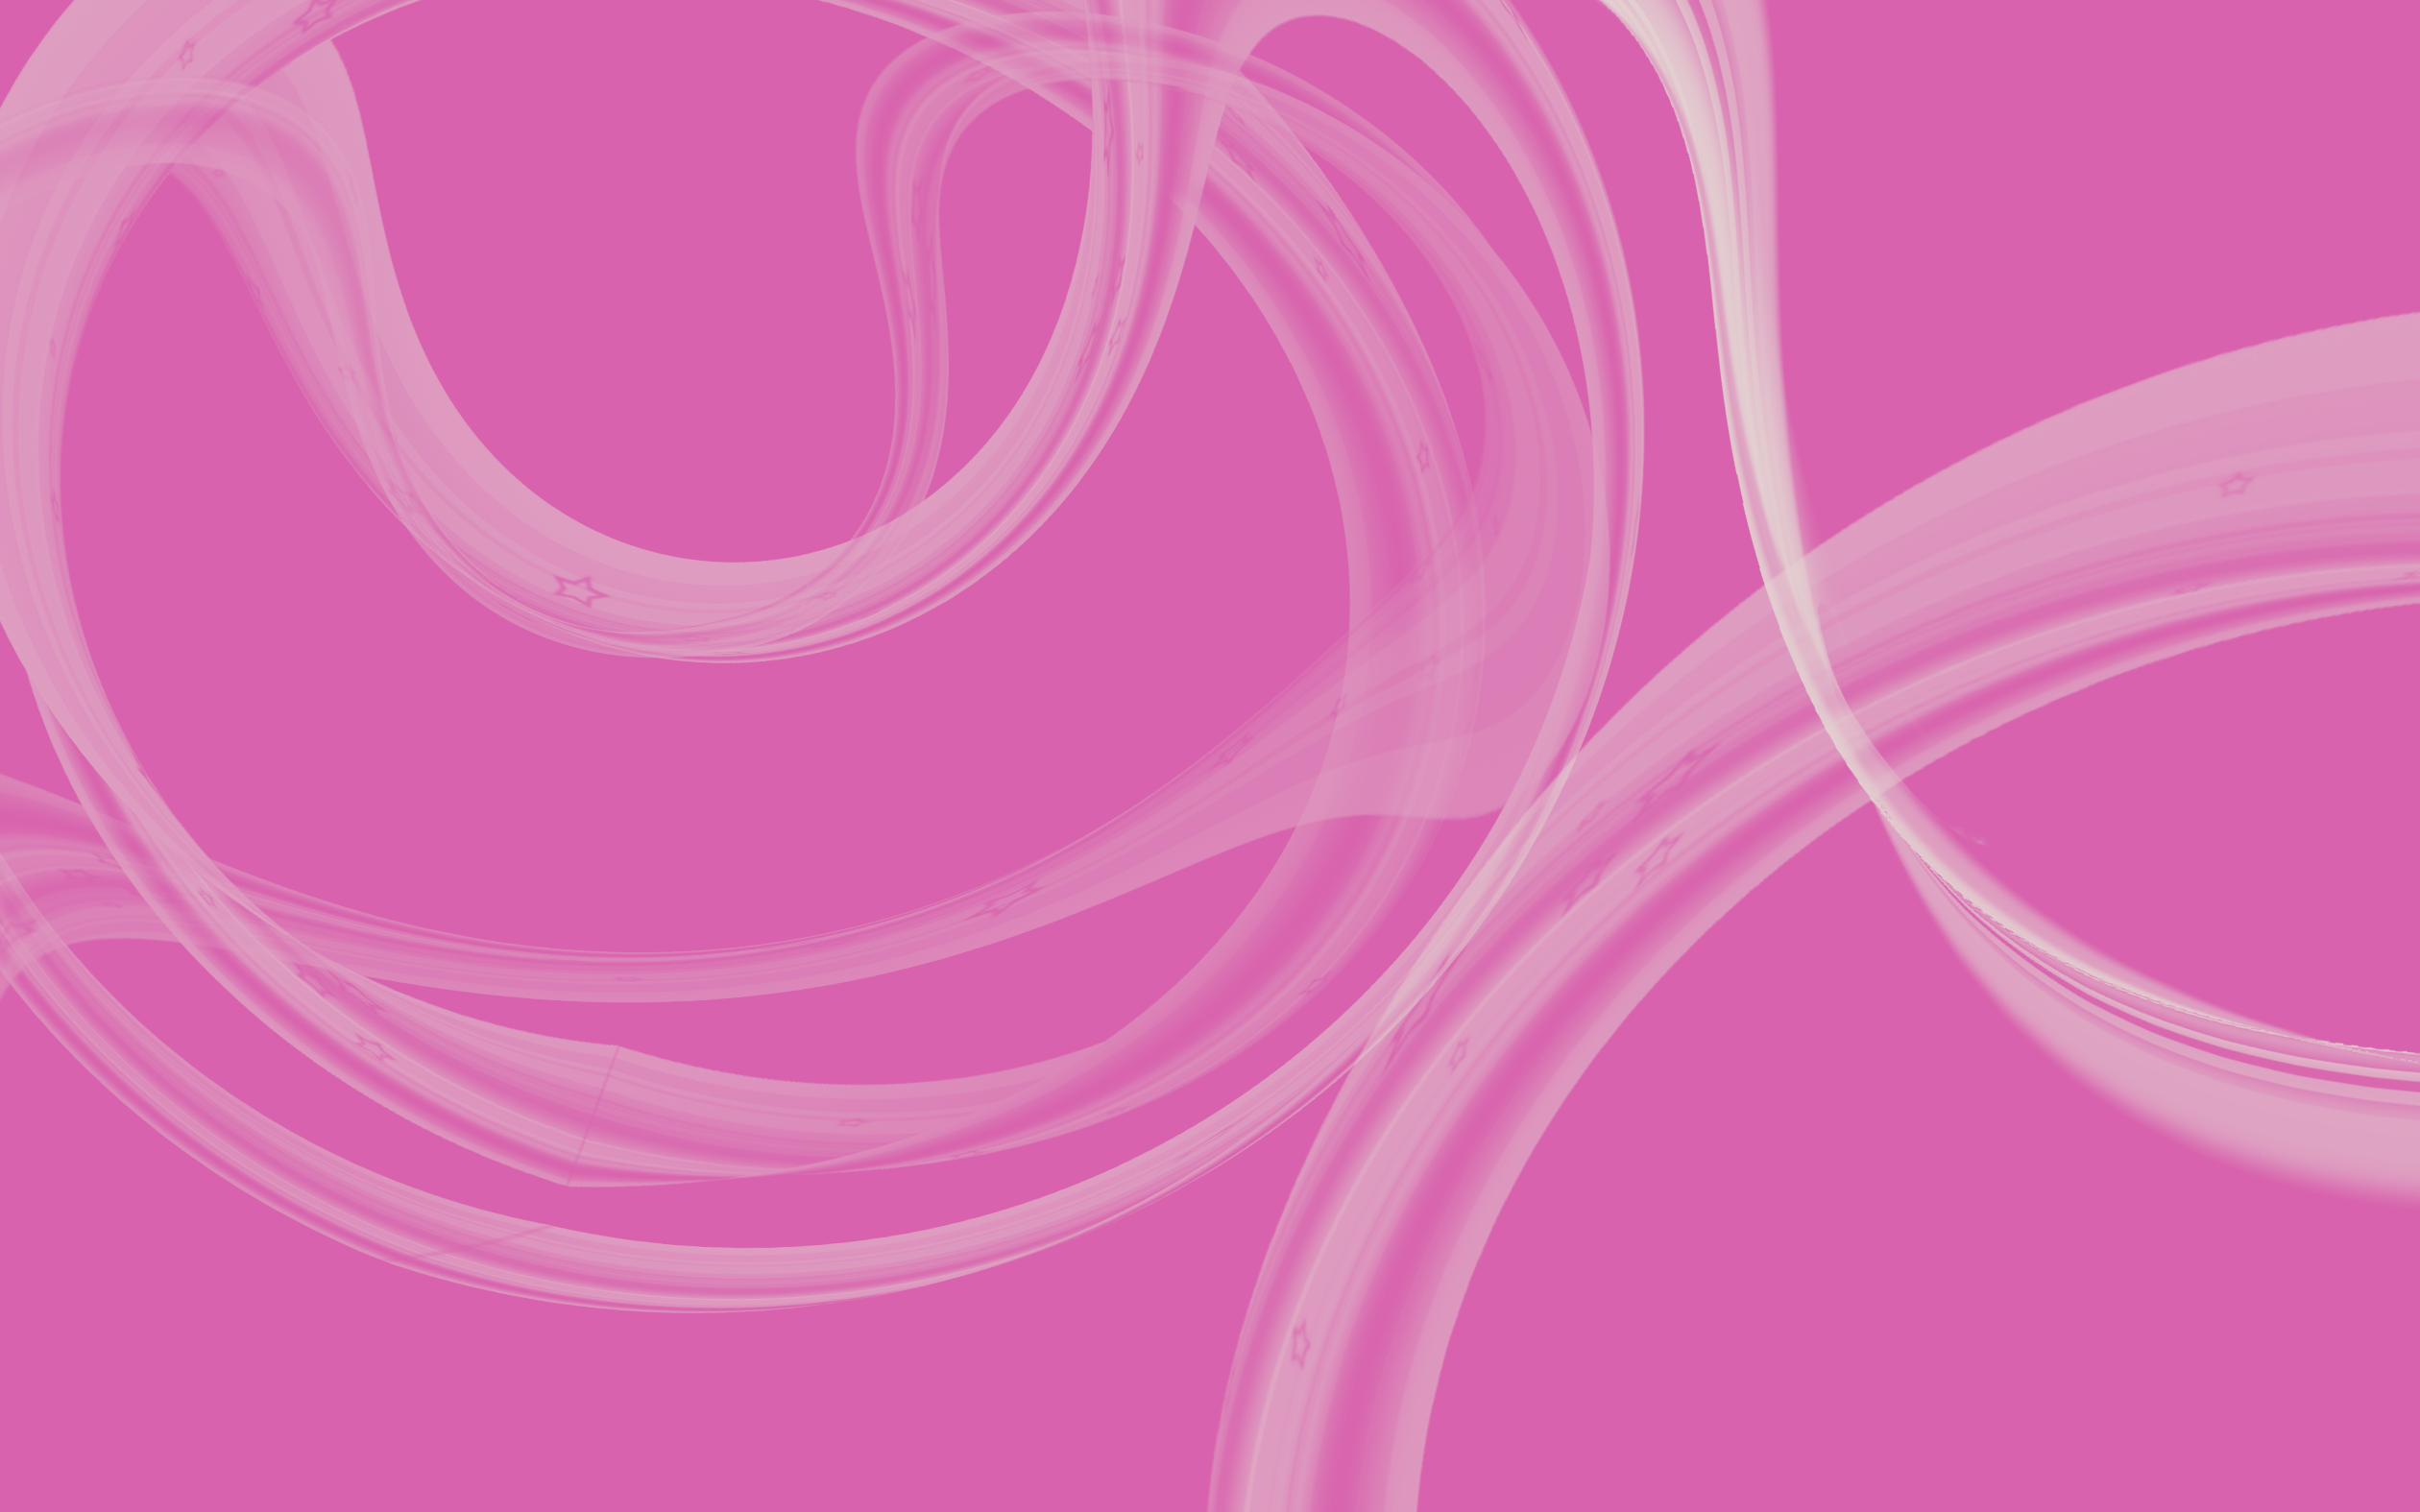 Wp Content Uploads Ribbons On Pink Background Png